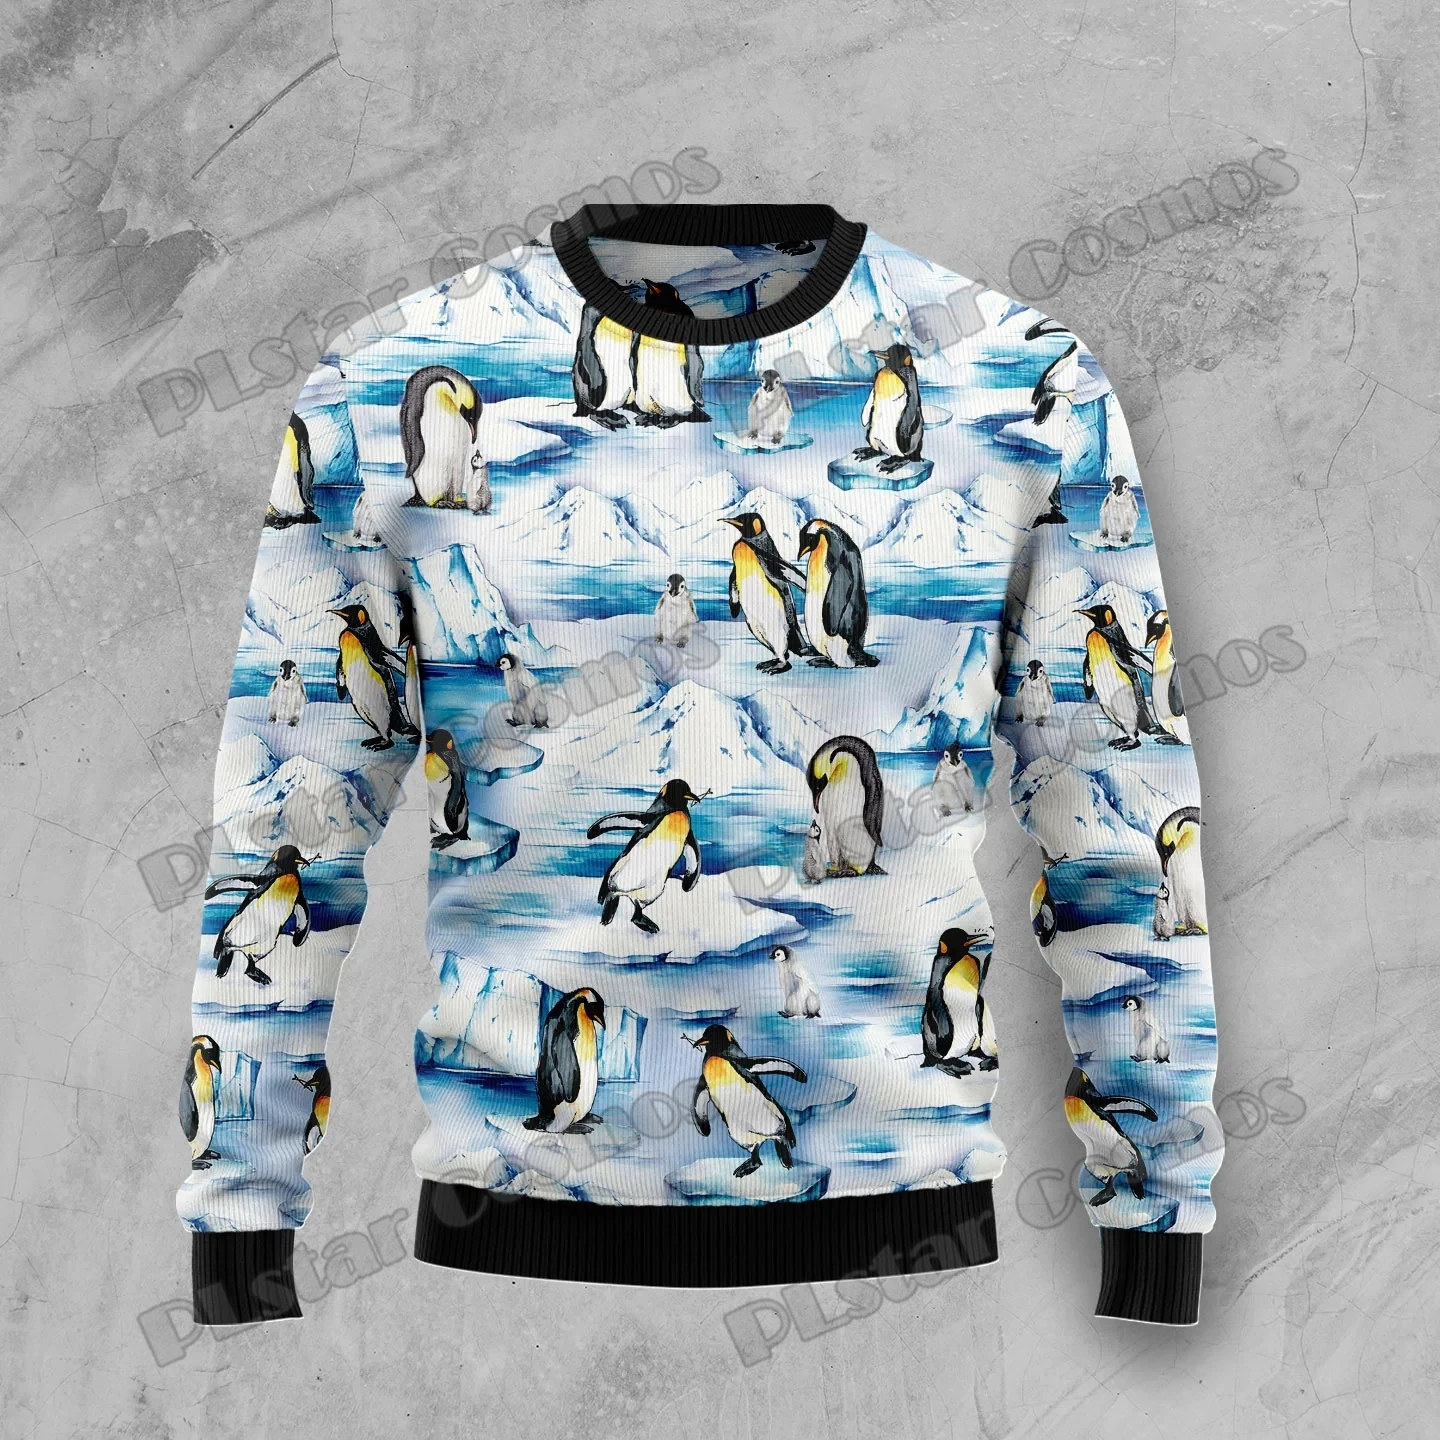 PLstar Cosmos Lovely Penguin & Turtle 3D Printed Fashion Men Ugly Christmas Sweater Winter Unisex Casual Knitwear Pullover MYY46